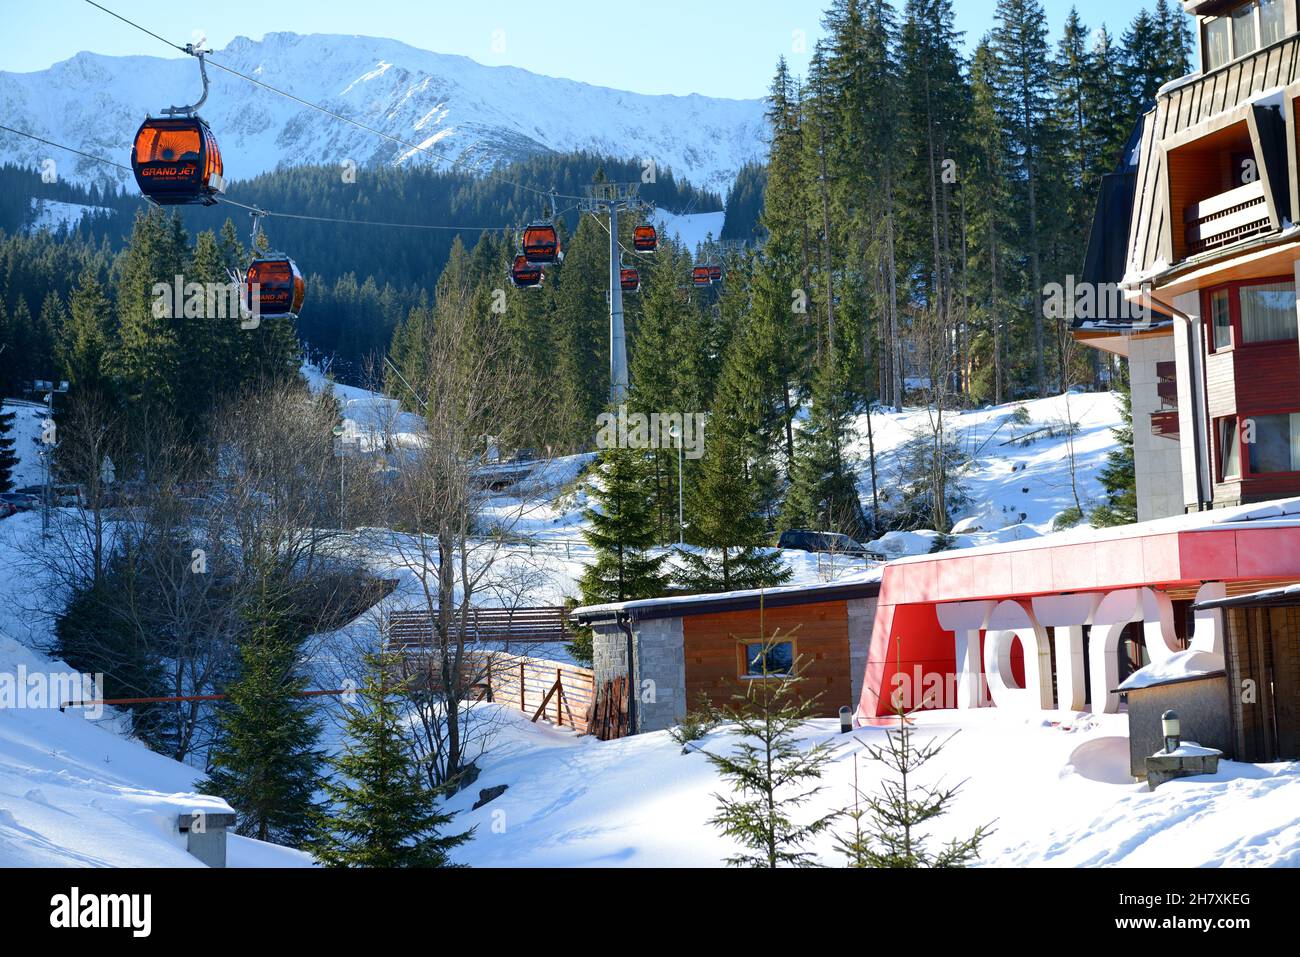 JASNA, SLOVAKIA - JANUARY 22: The Grand wellness hotel and cableway in Jasna Low Tatras. It is the largest ski resort in Slovakia with 49 km of pistes Stock Photo